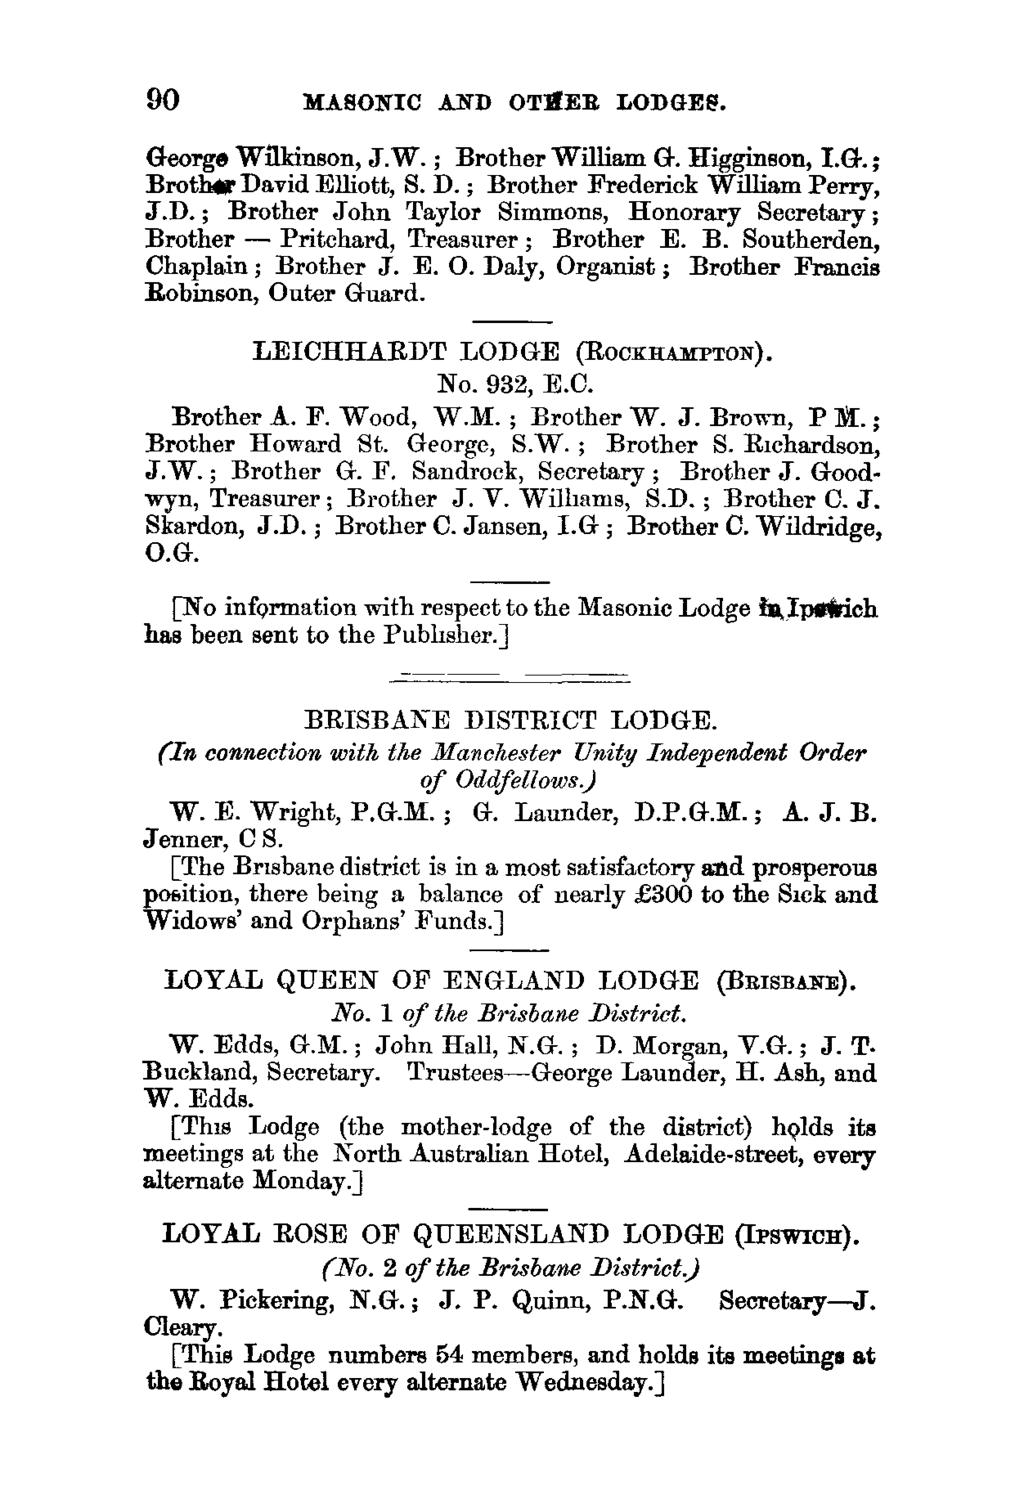 90 MASONIC AND OTHER LODGES. George Wilkinson, JW.; Brother William G. Higginson, I.G.; Broth& David Elliott, S. D. ; Brother Frederick William Perry, J.D.; Brother John Taylor Simmons, Honorary Secretary ; Brother - Pritchard, Treasurer ; Brother E.